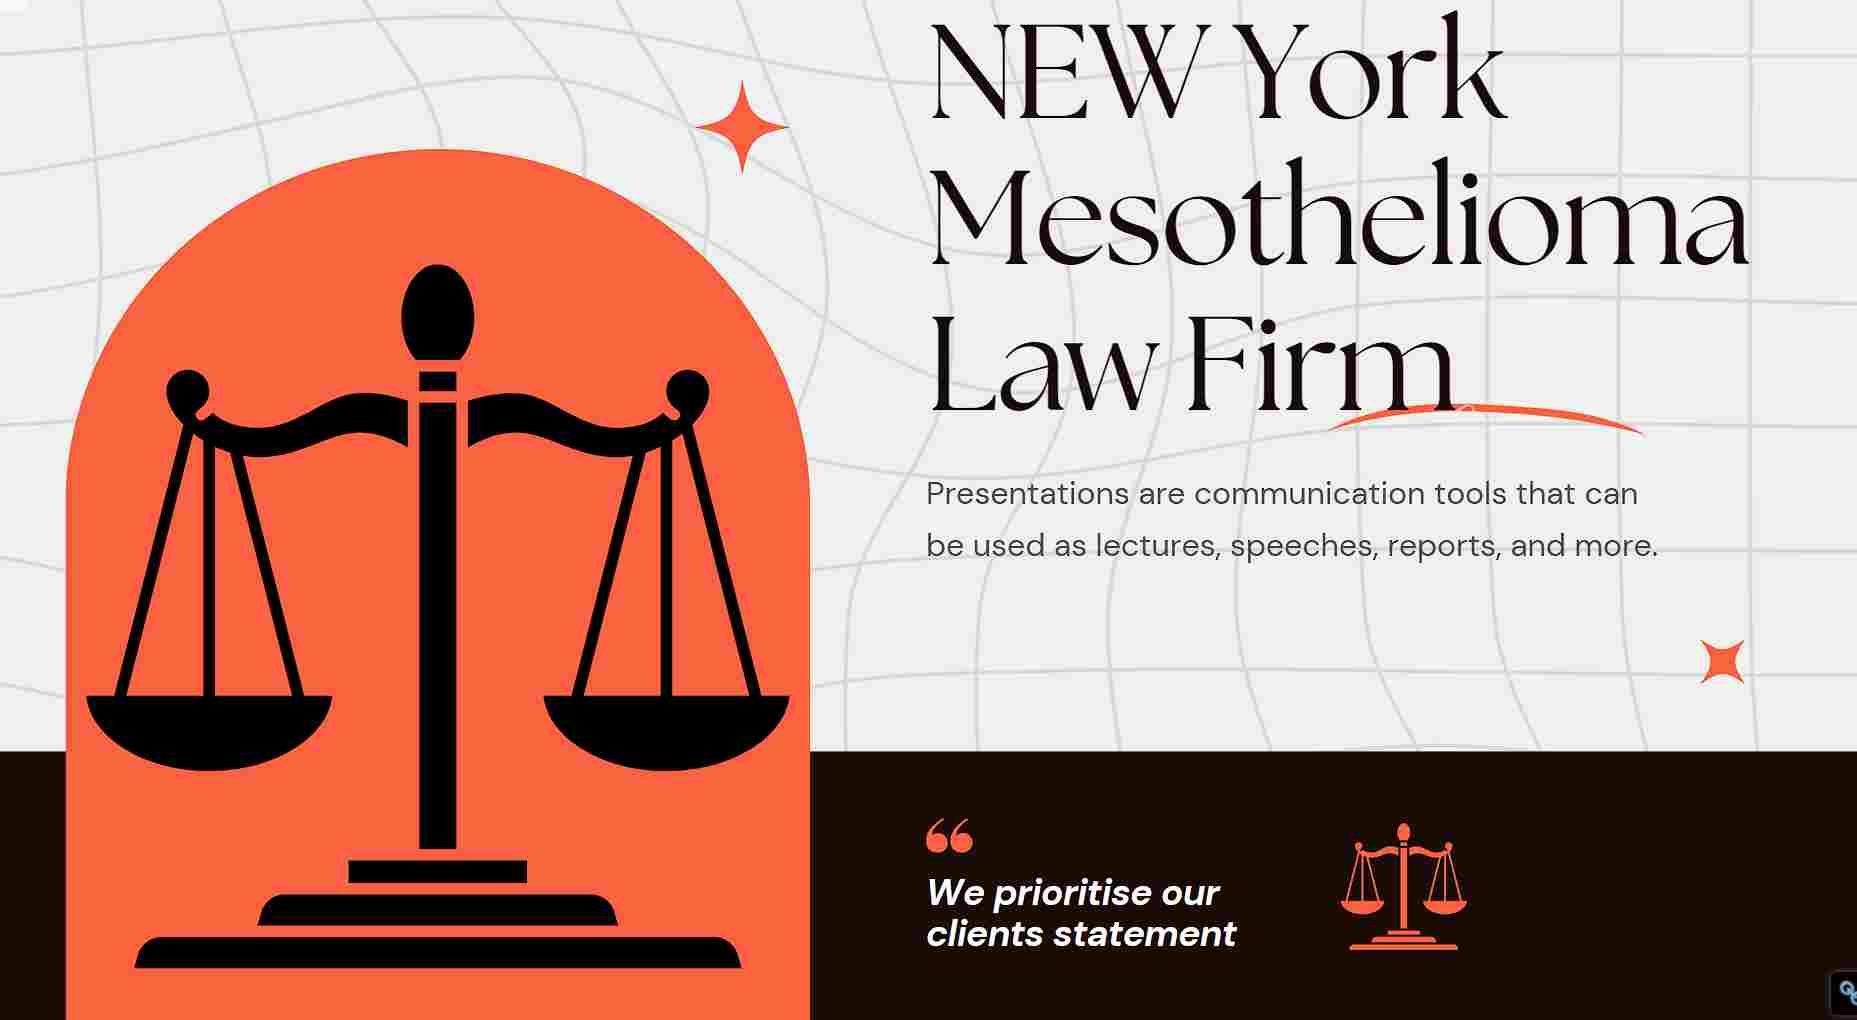 NEW York Mesothelioma Law Firm